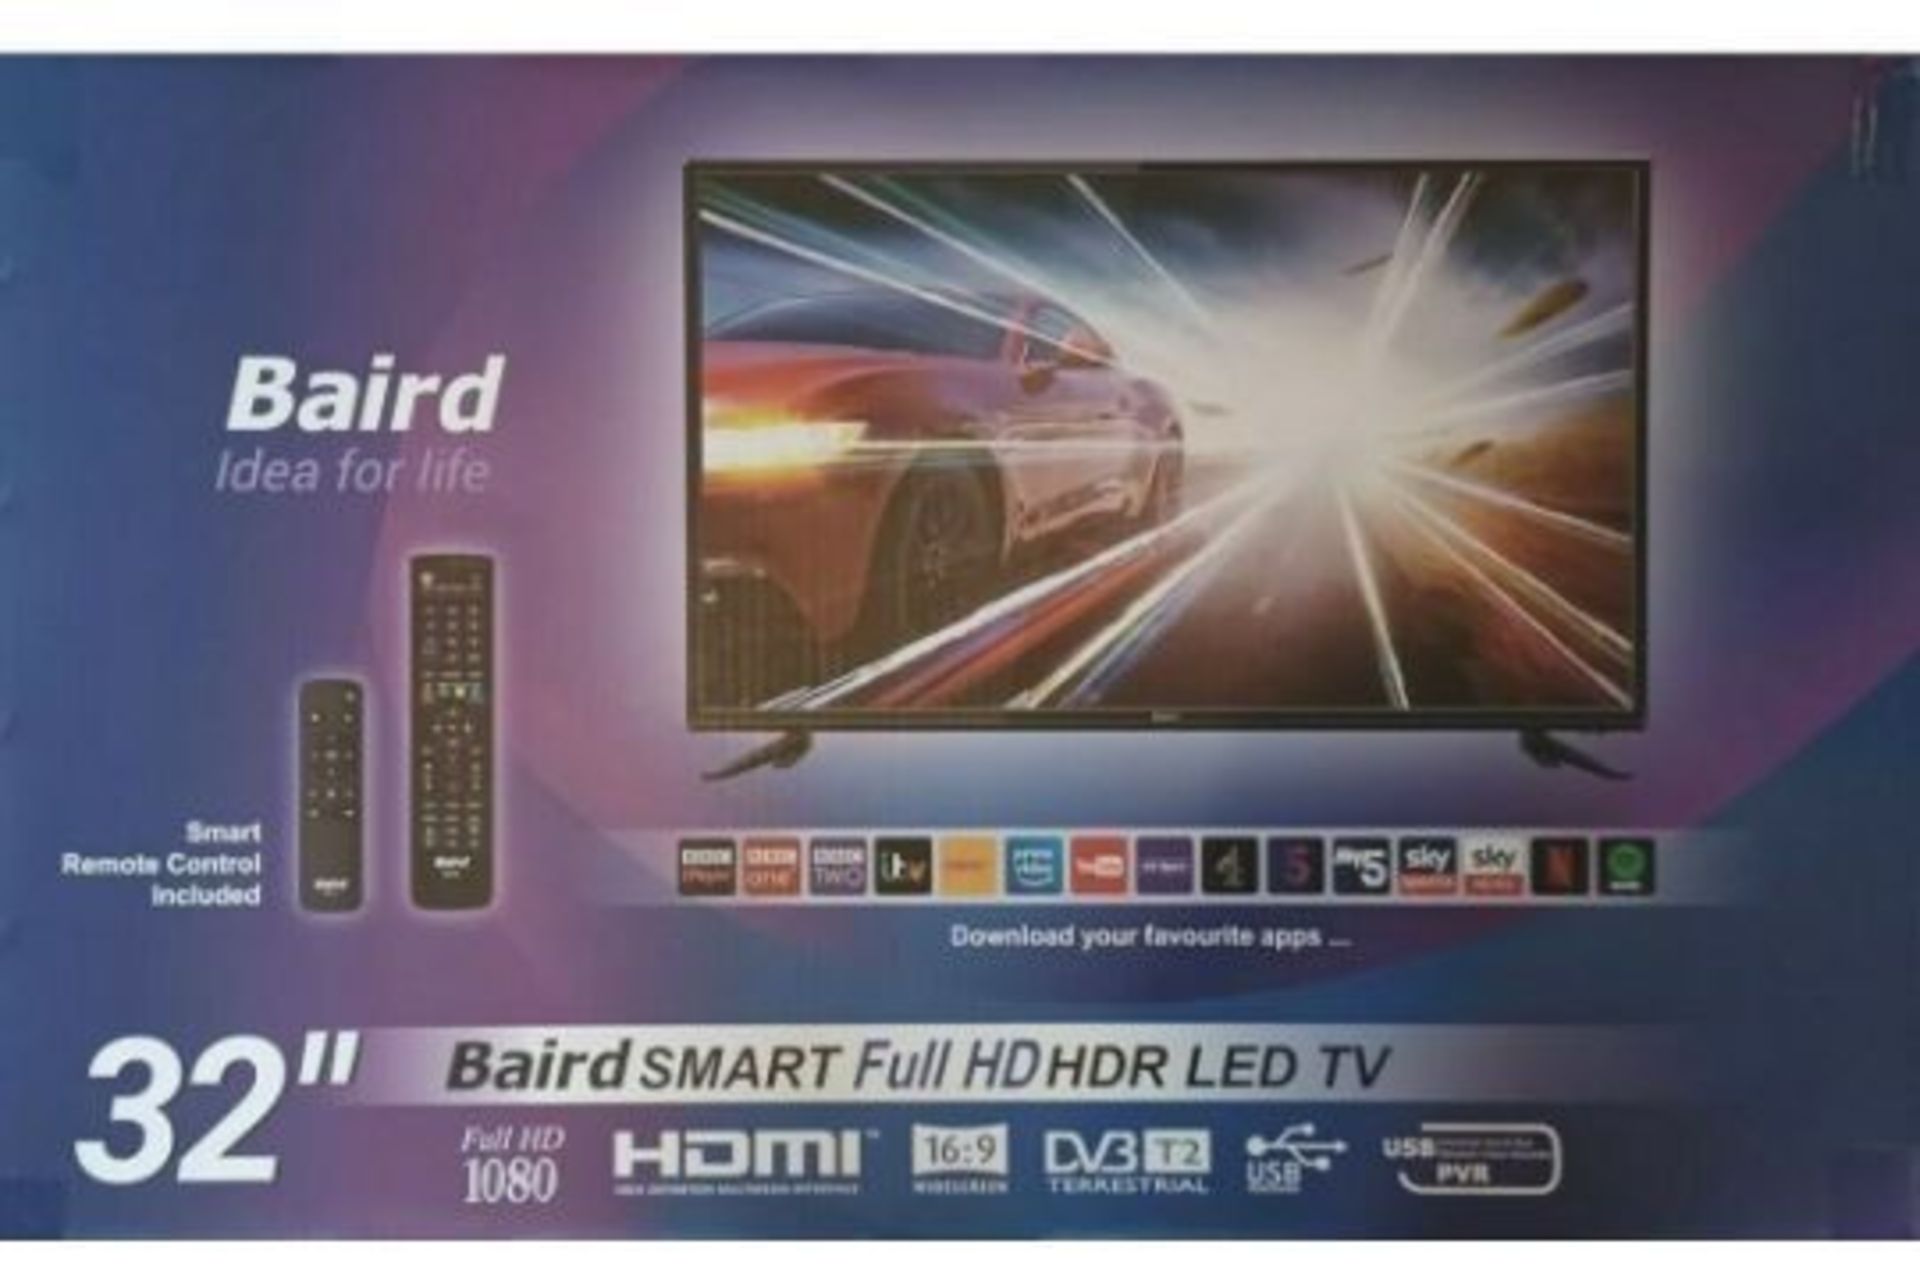 BAIRD 32 INCH SMART TV WITH FULL HD, HDR LED TV. (P/W)